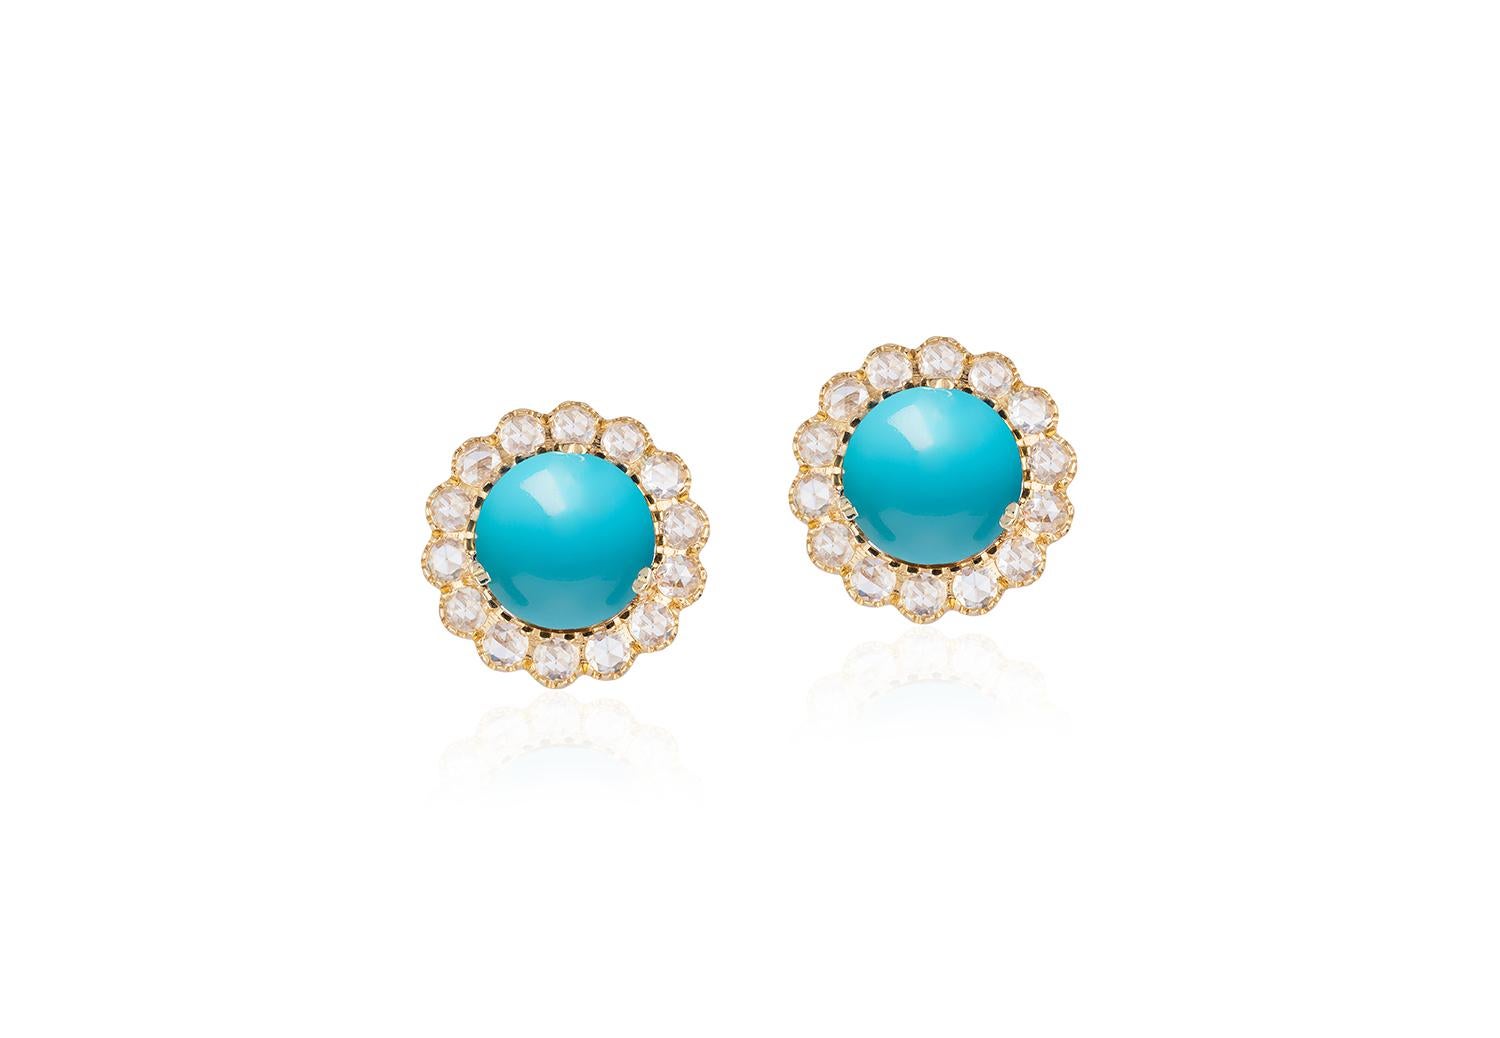 Contemporary Goshwara Cabochon Turquoise And Rose Cut Diamond Earrings